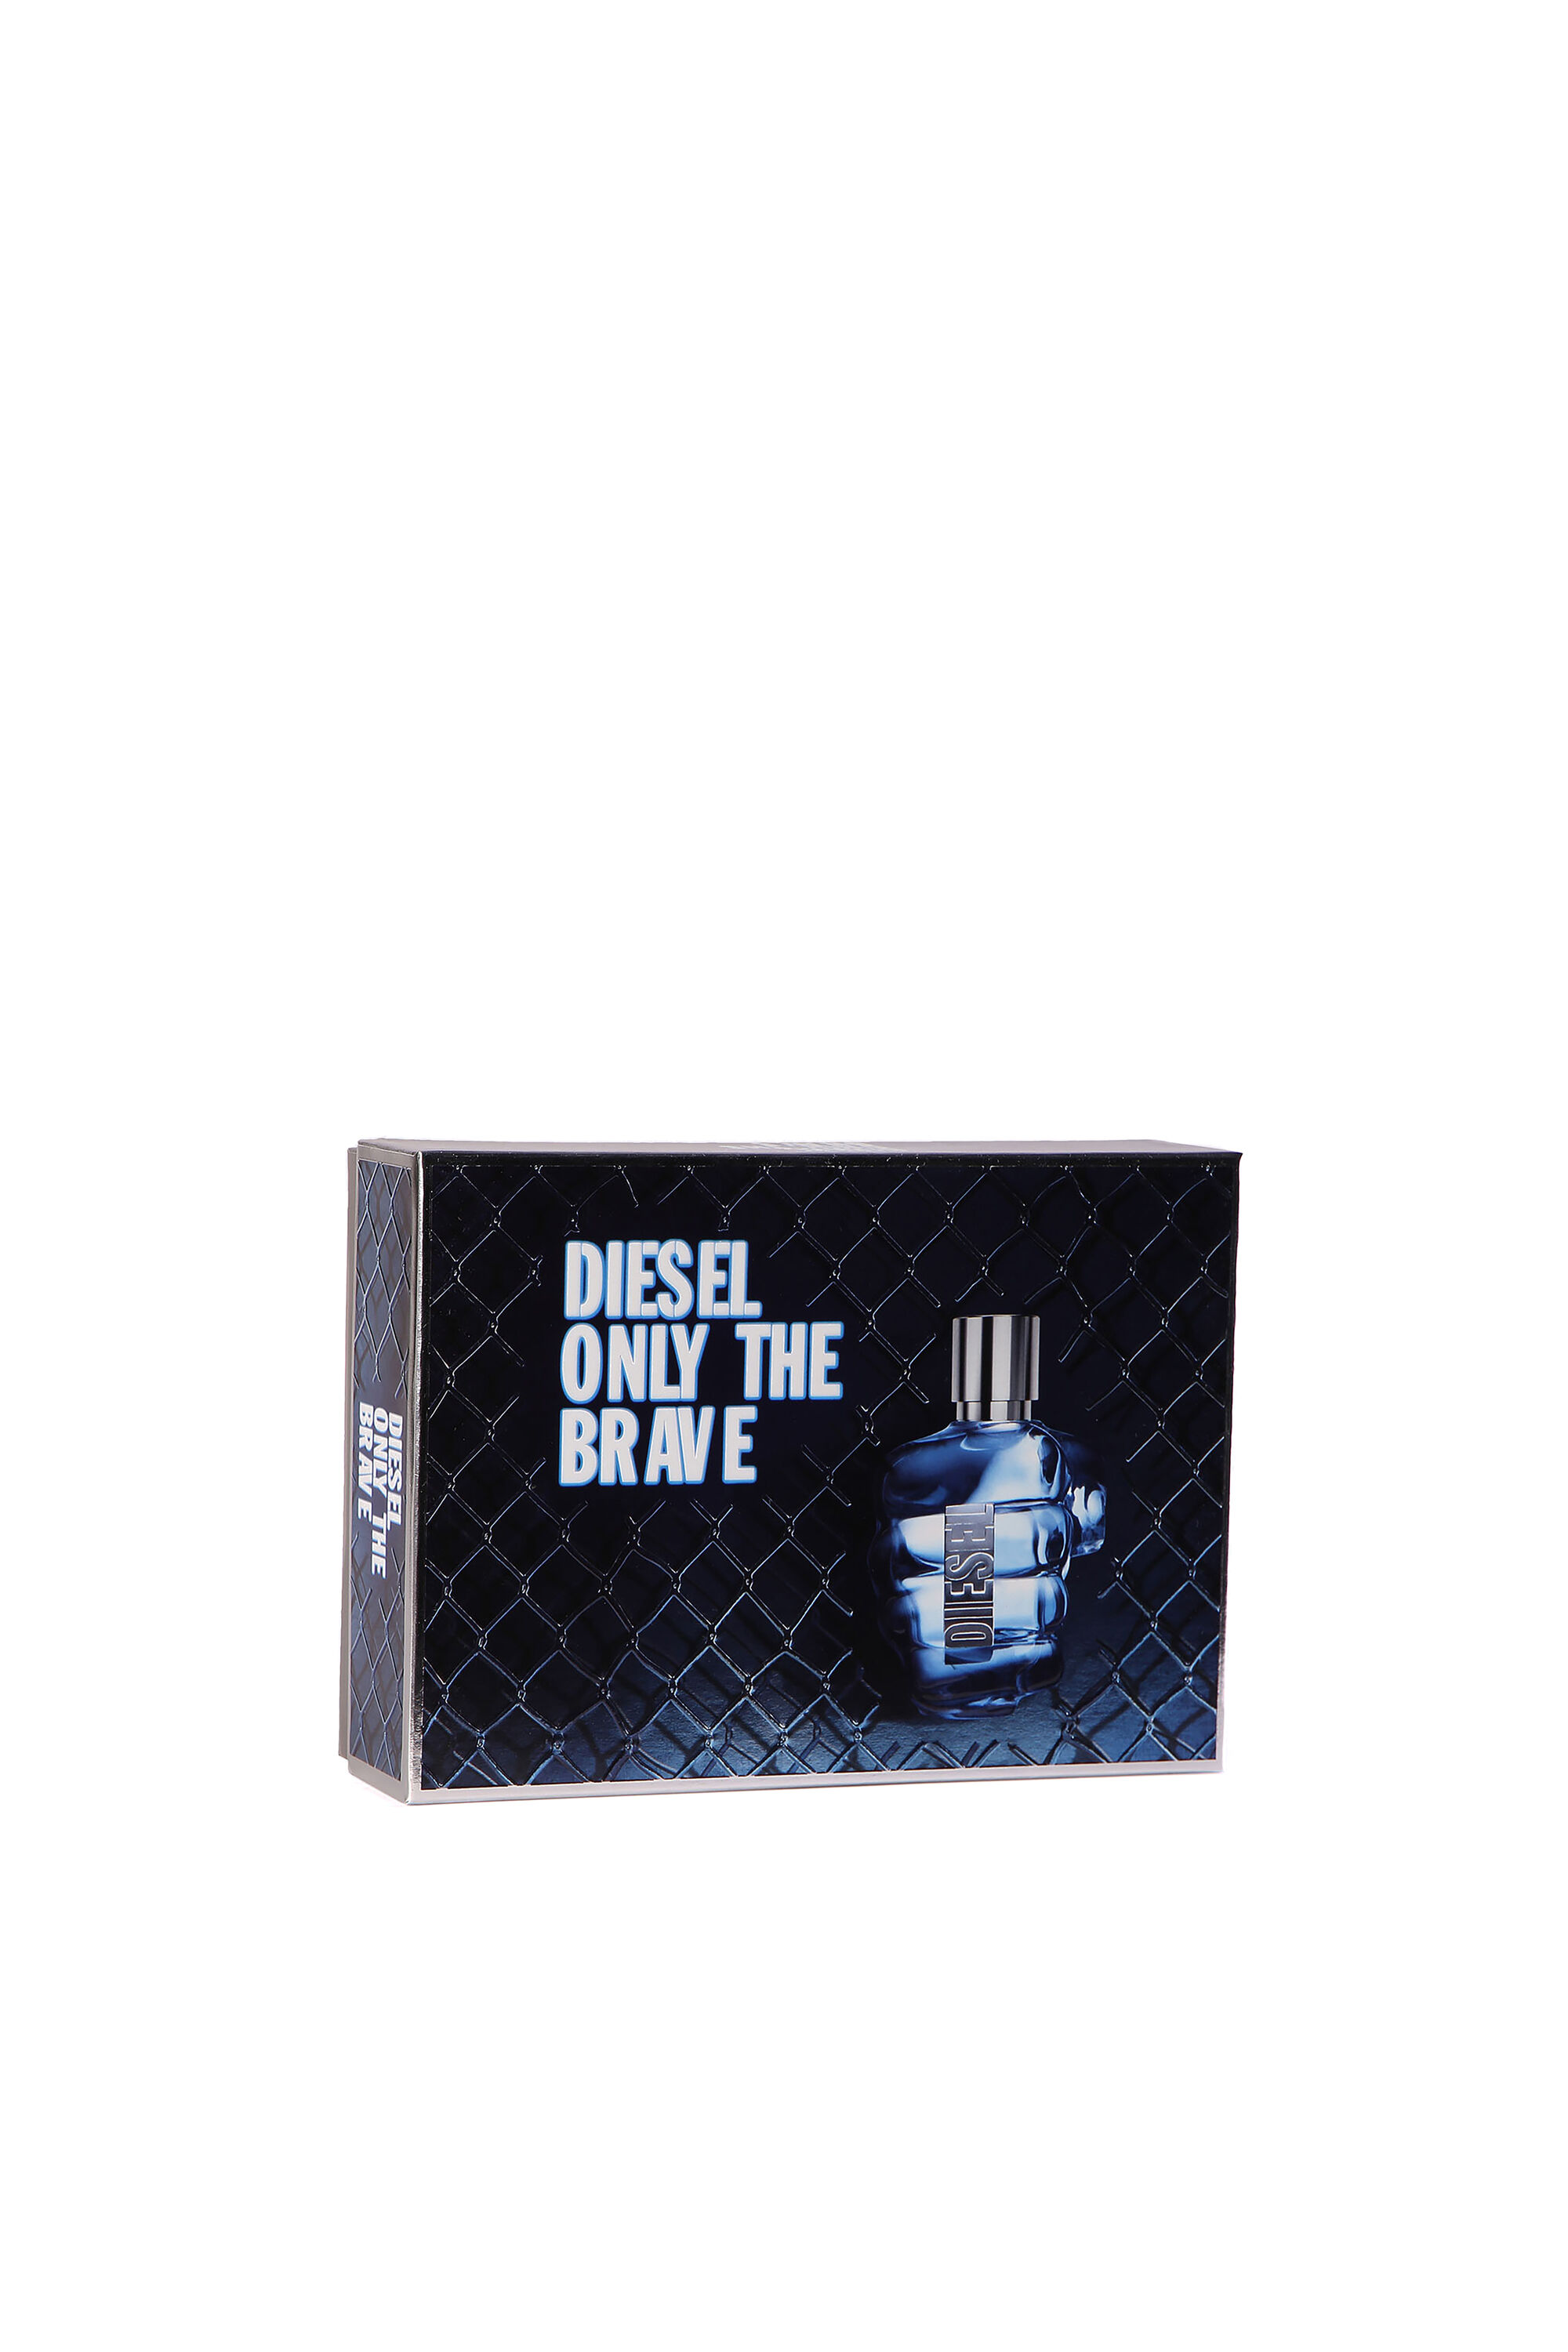 Diesel - ONLY THE BRAVE 50ML GIFT SET,  - Image 1